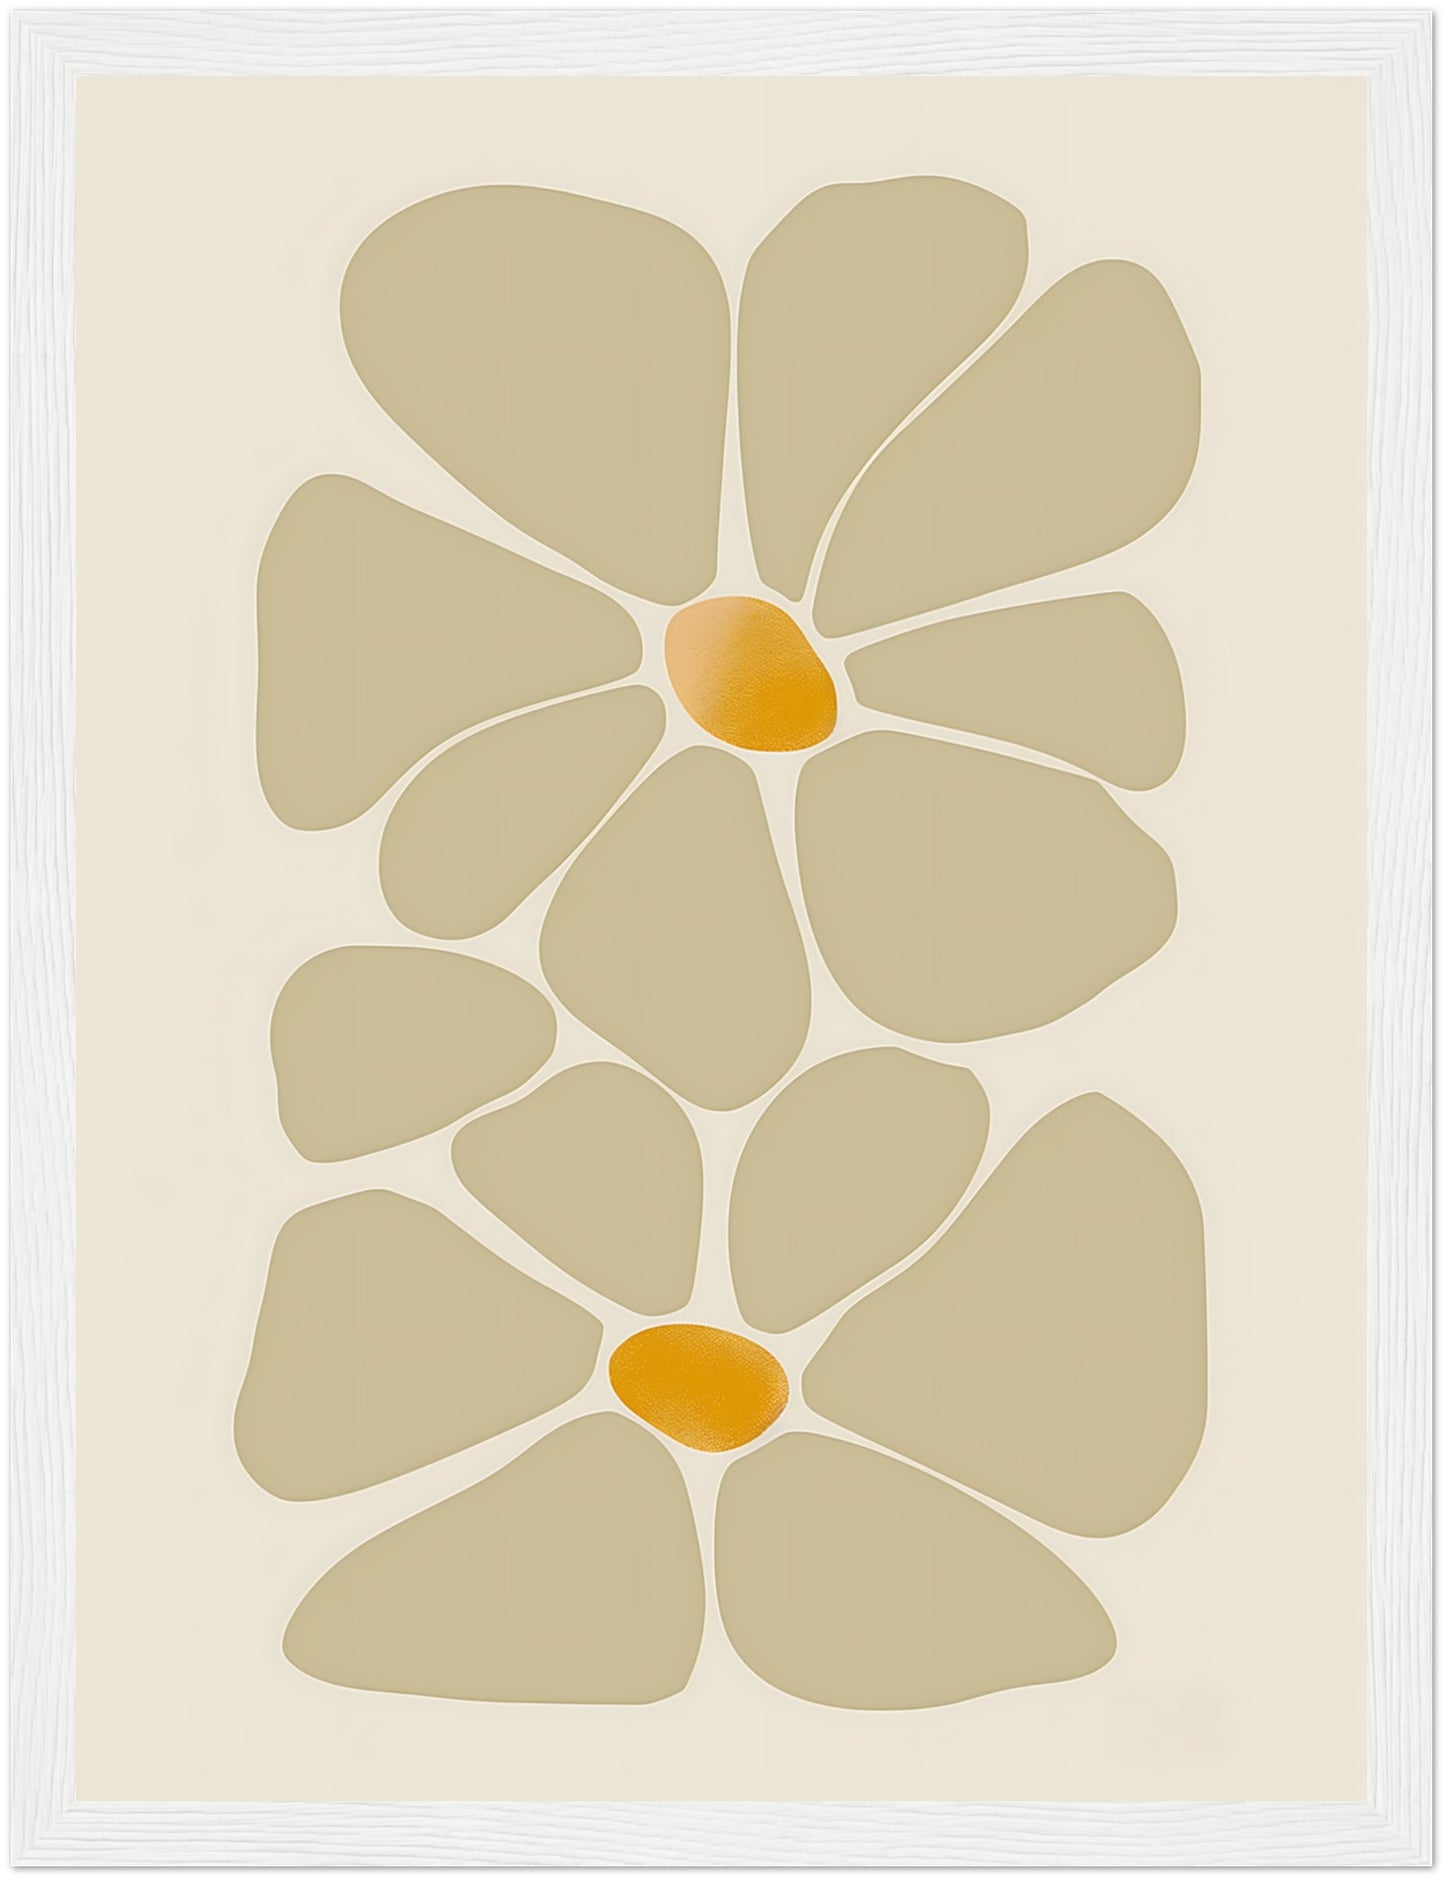 Abstract floral design in earth tones, framed with a wooden border.